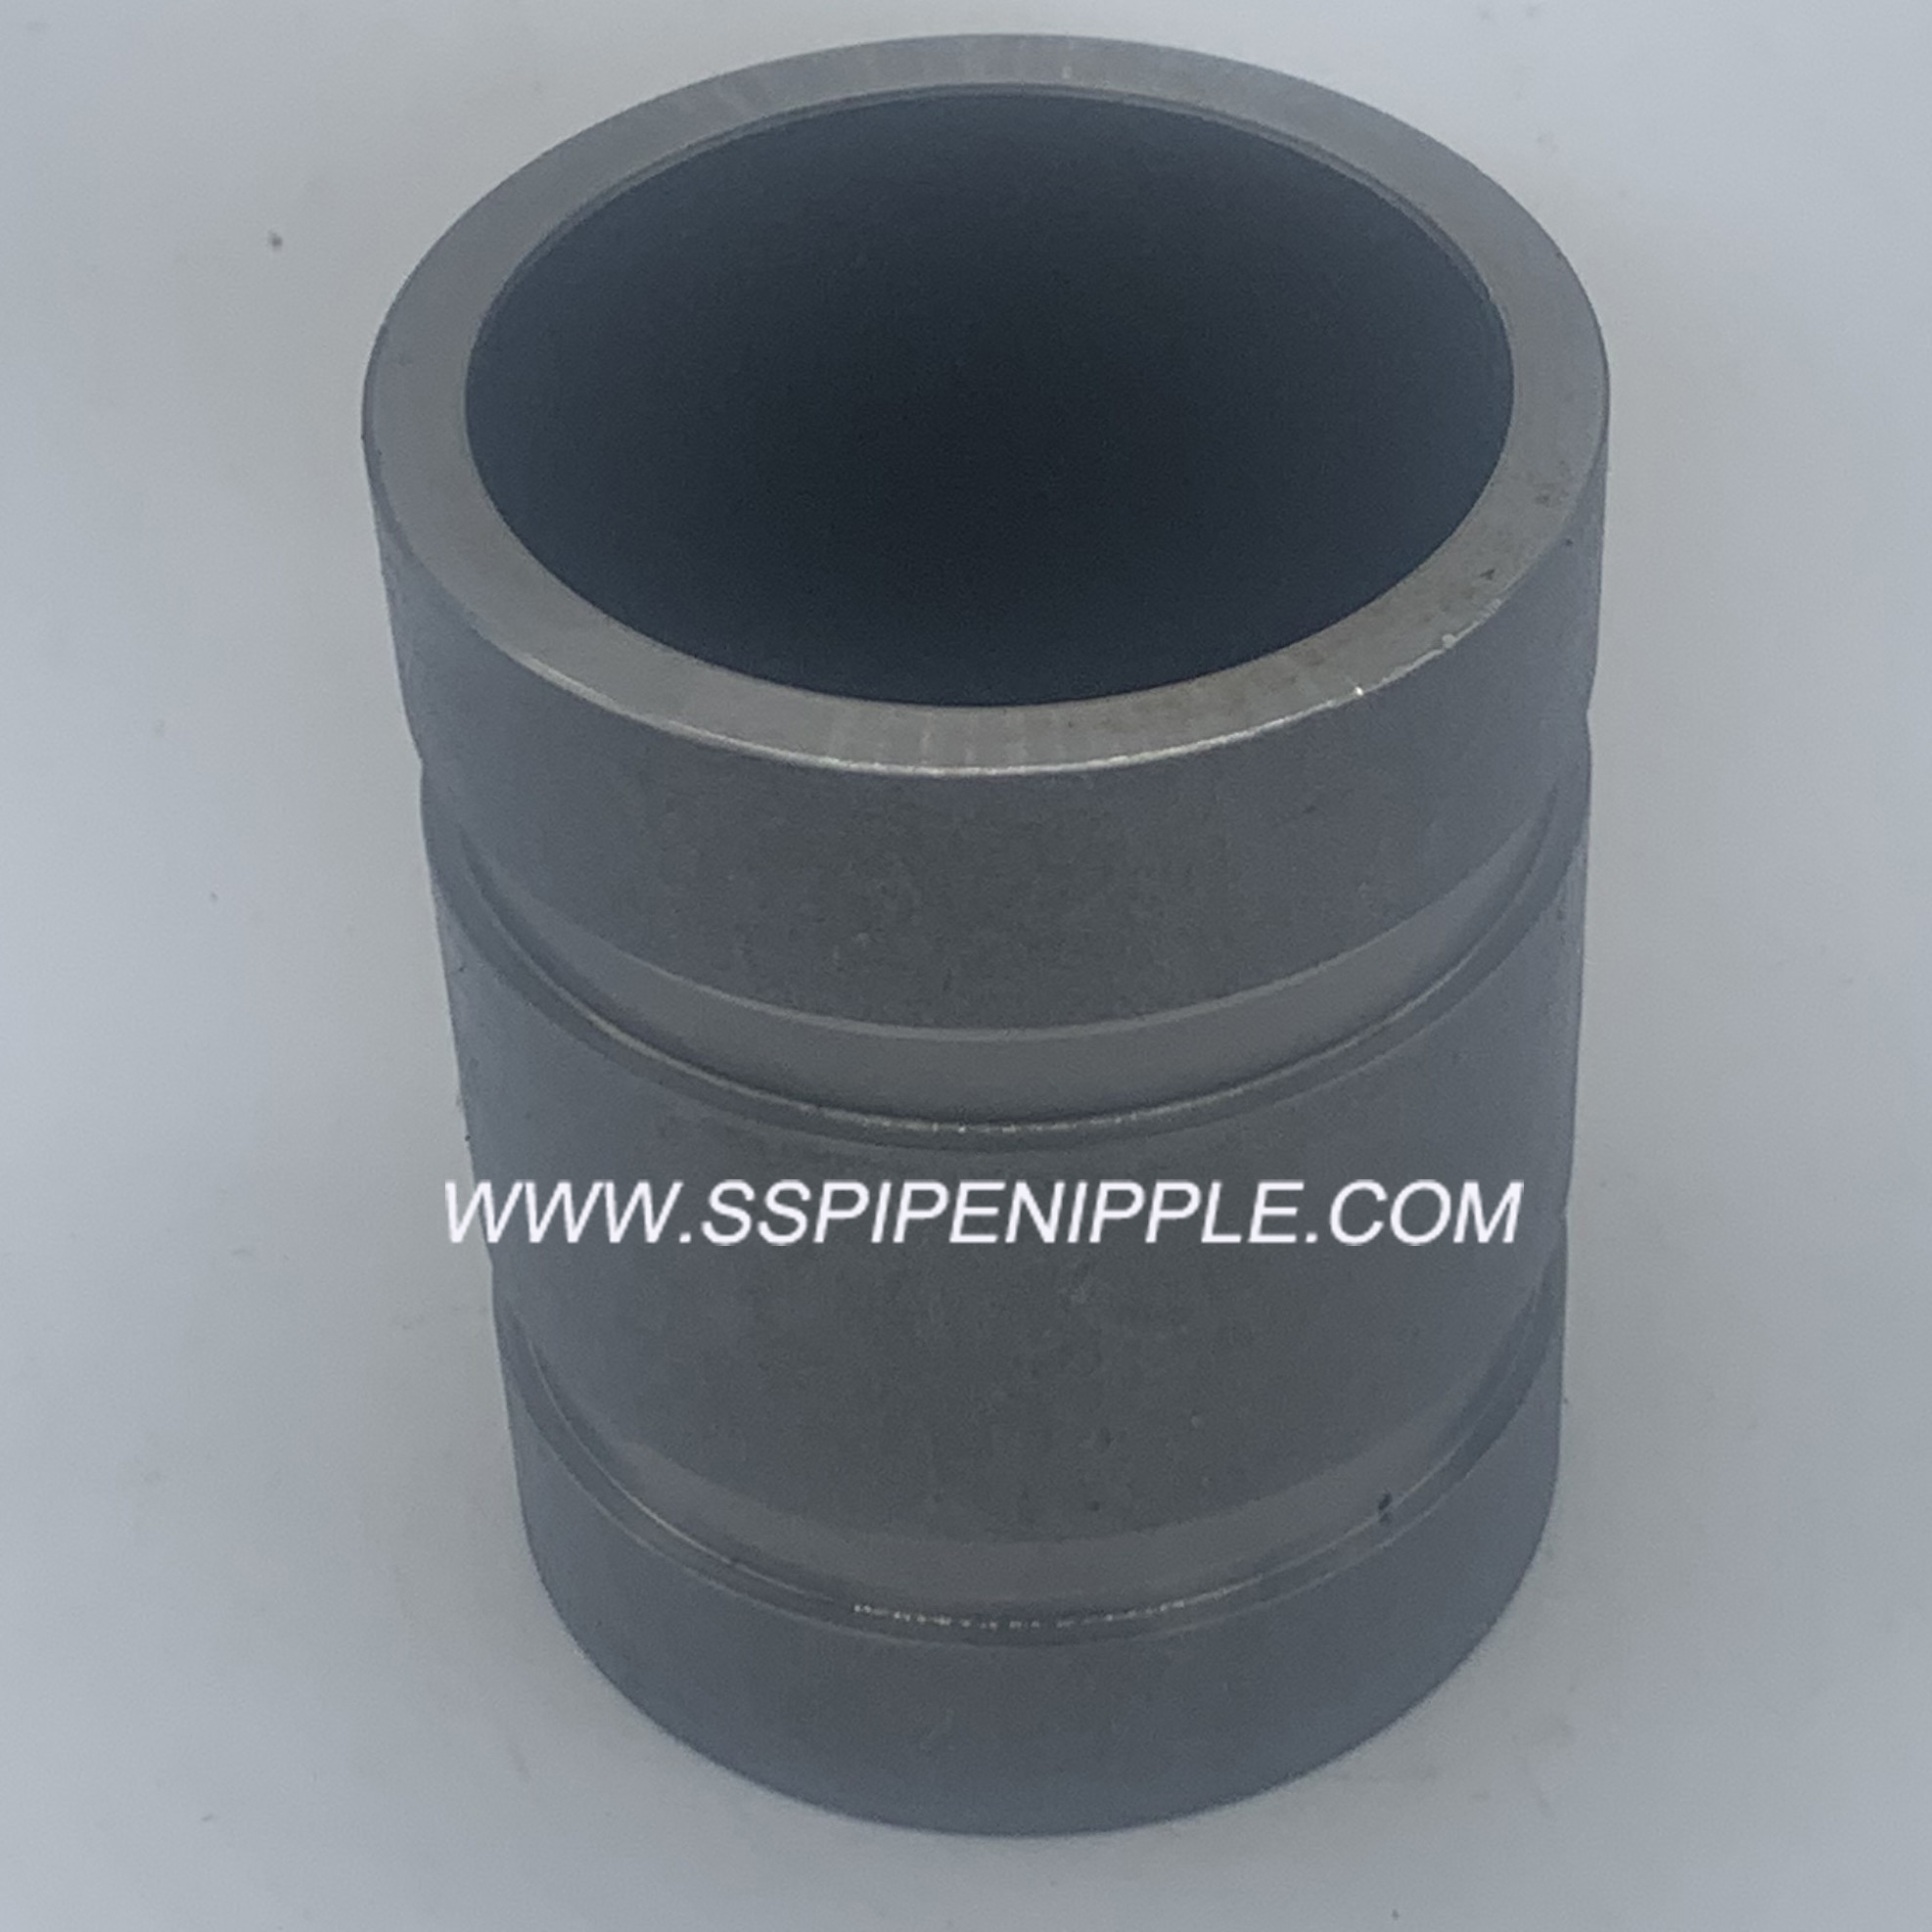 Equal Shape Grooved Pipe Fittings Convenient Connection Easy To Operate